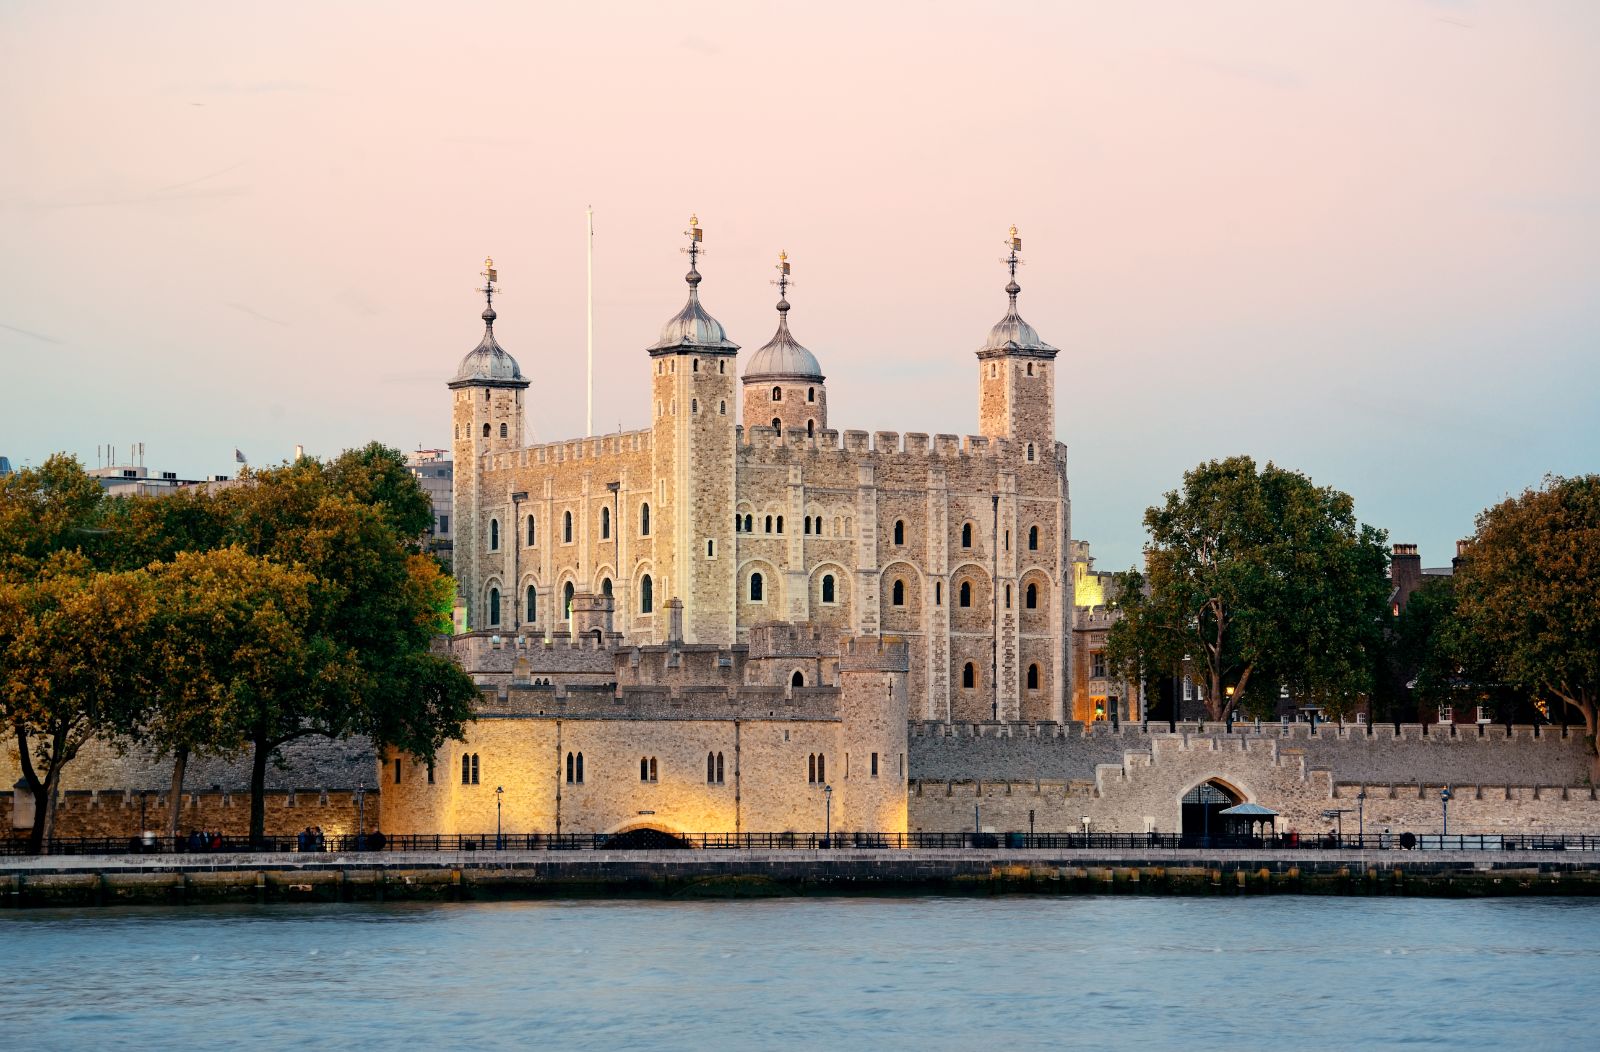 Tower of London and Thames River in London